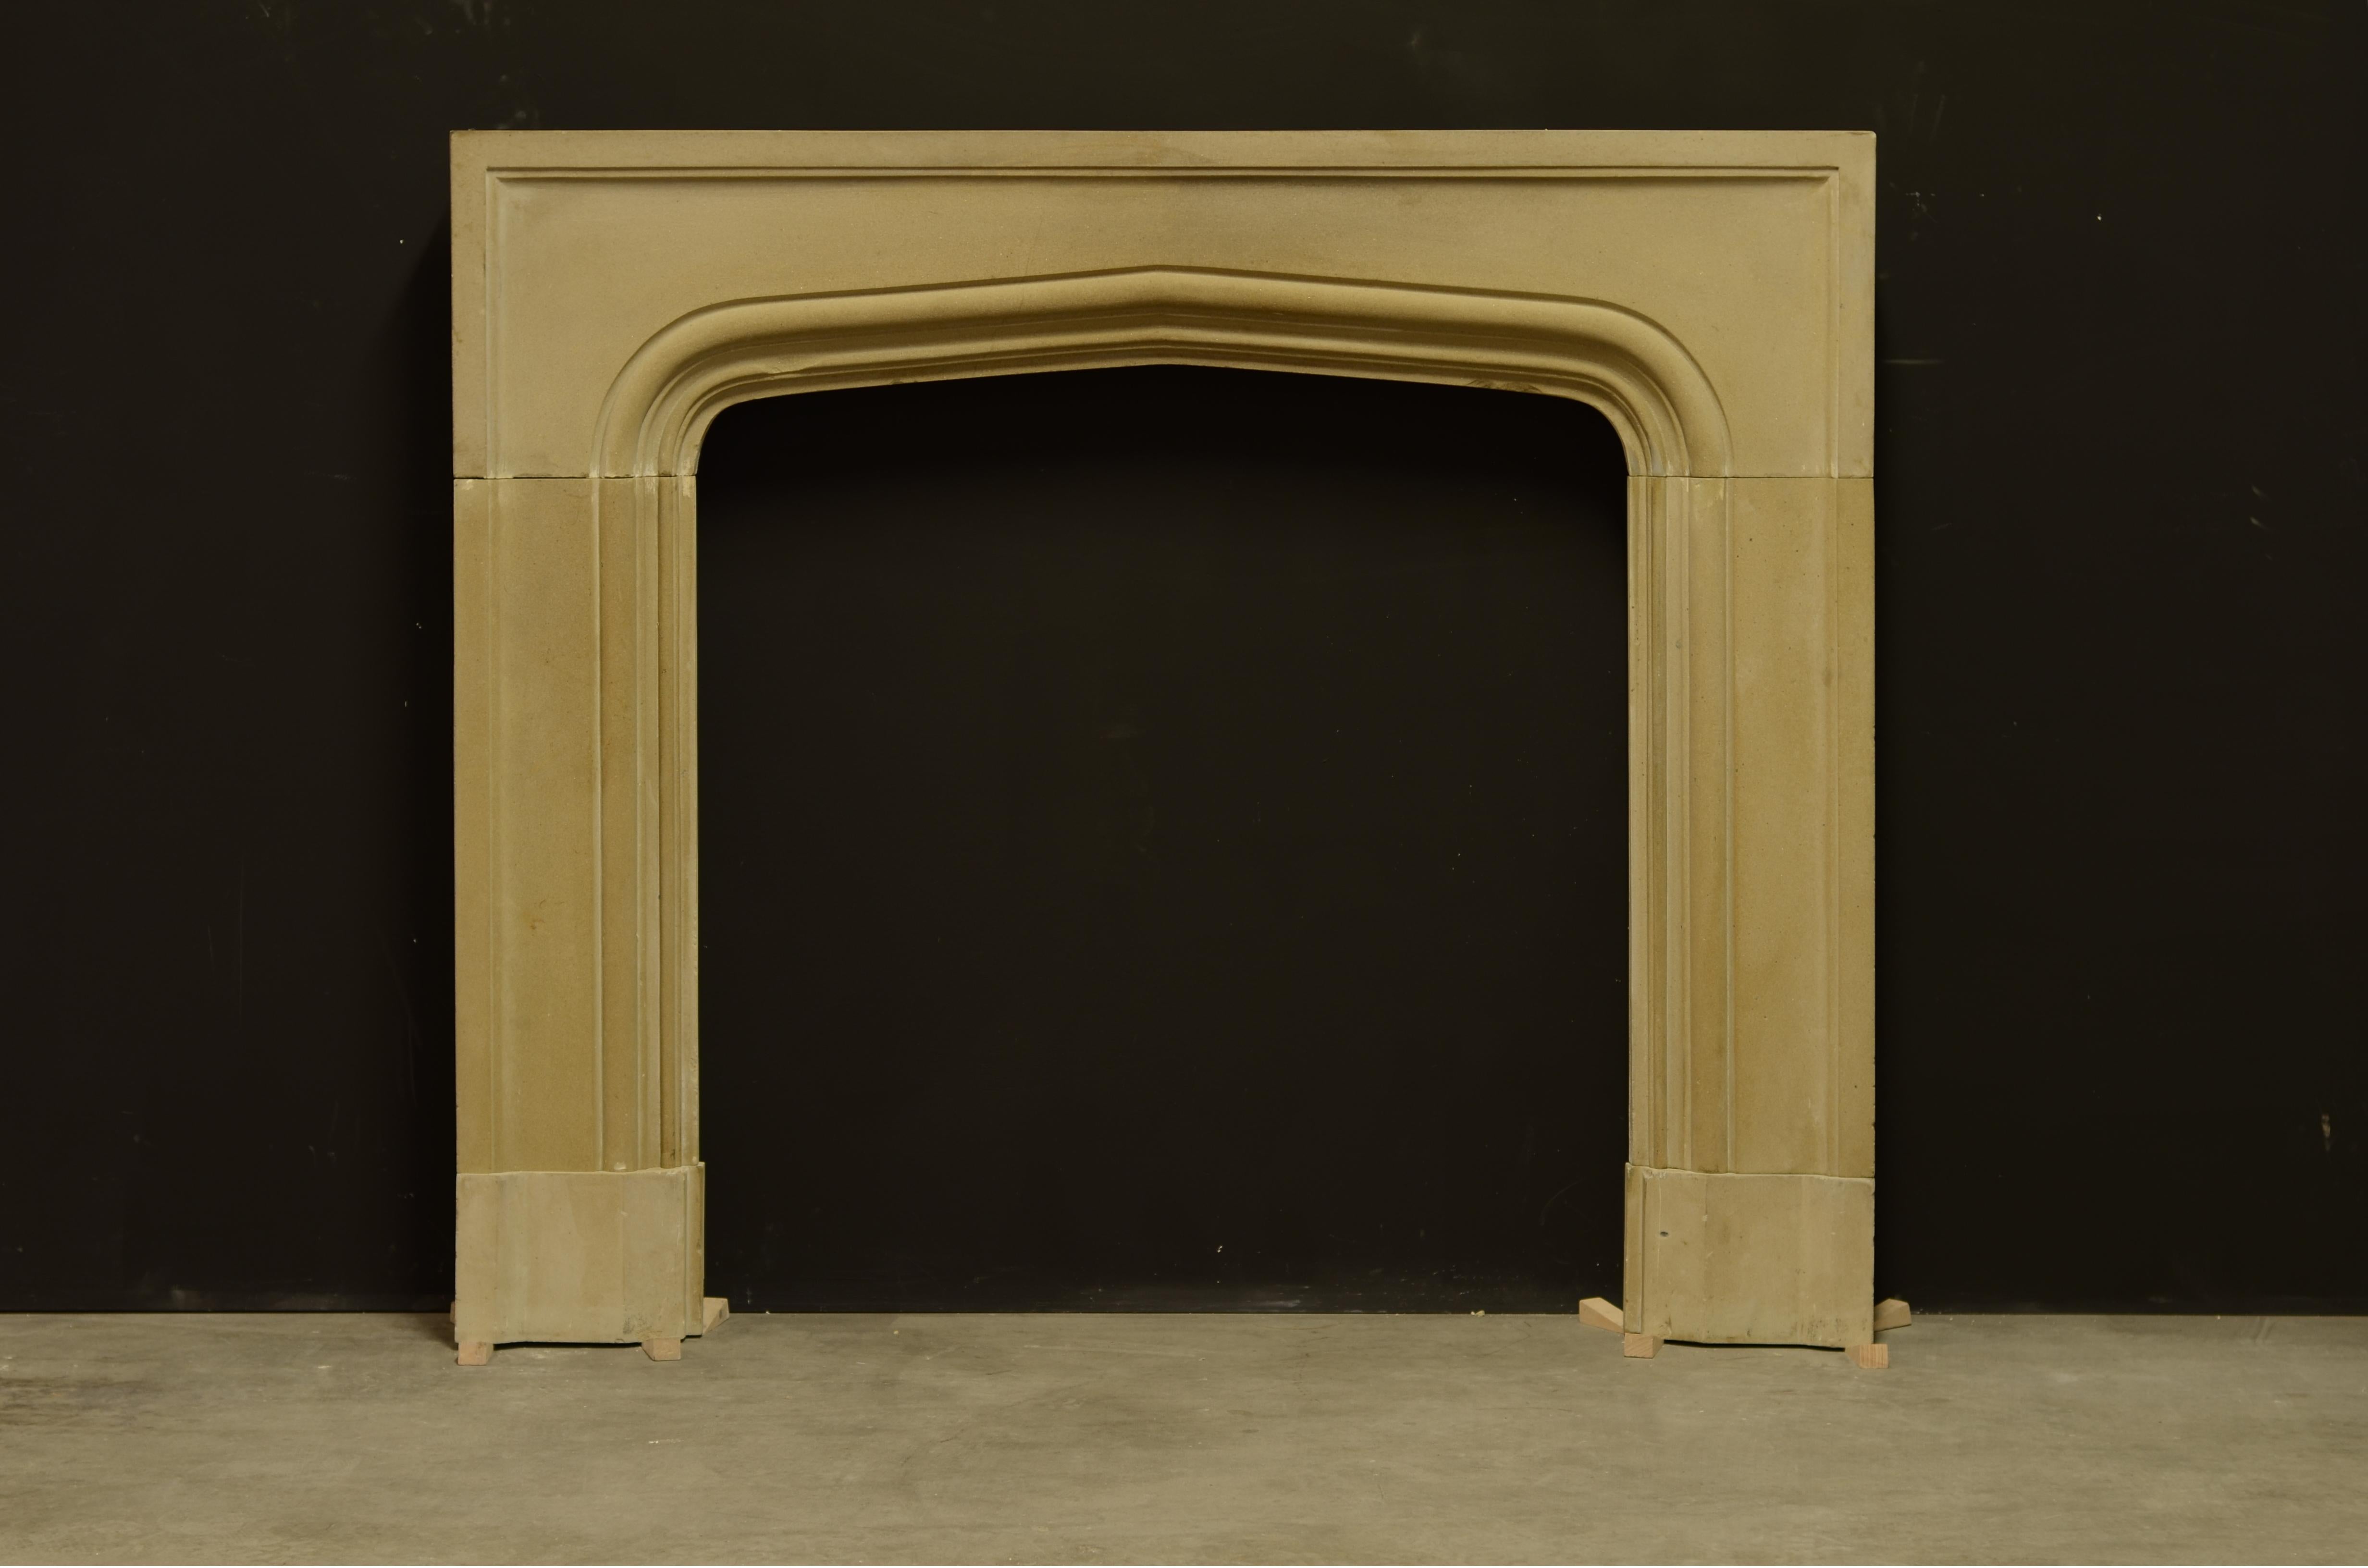 Very nice profiled Tudor profile in soft toned and warm colored sandstone.
Perfect dimensions, was installed into the wall.

Has some small chips but overall very nice condition and patina.
This lovely fireplace is sold by Schermerhorn antique